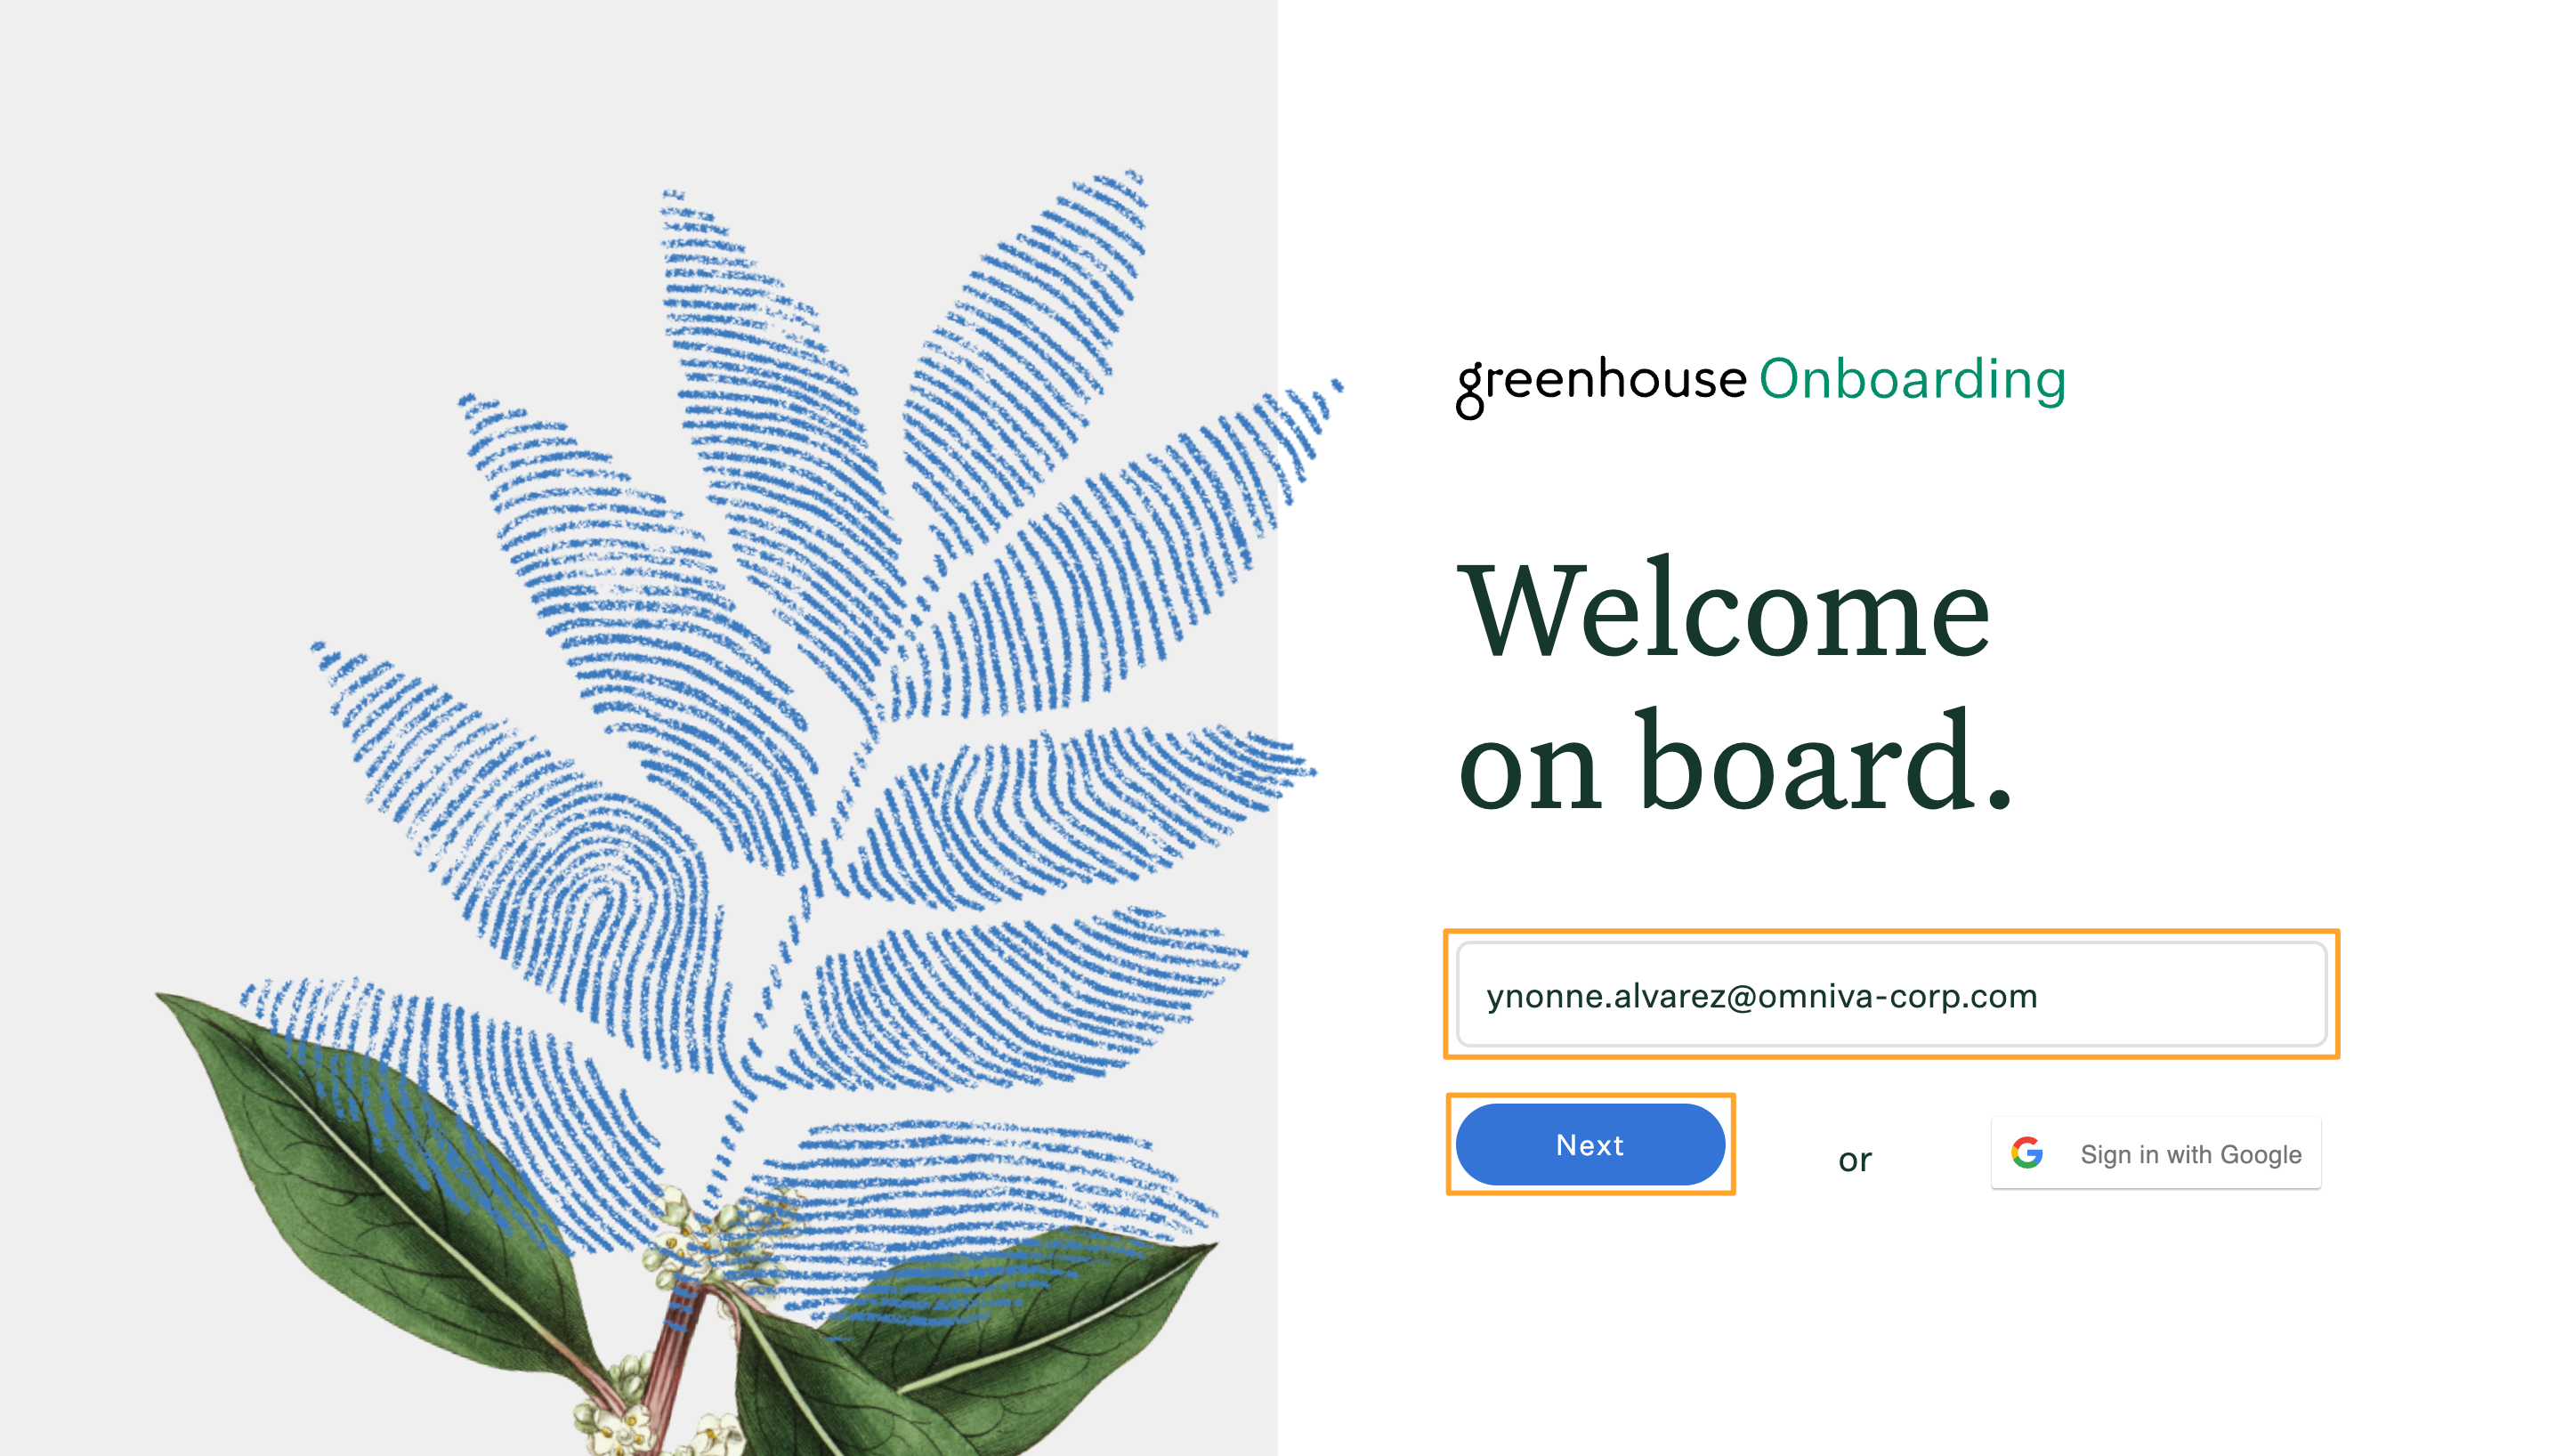 Greenhouse Onboarding login page with email field filled out and Next button highlighted